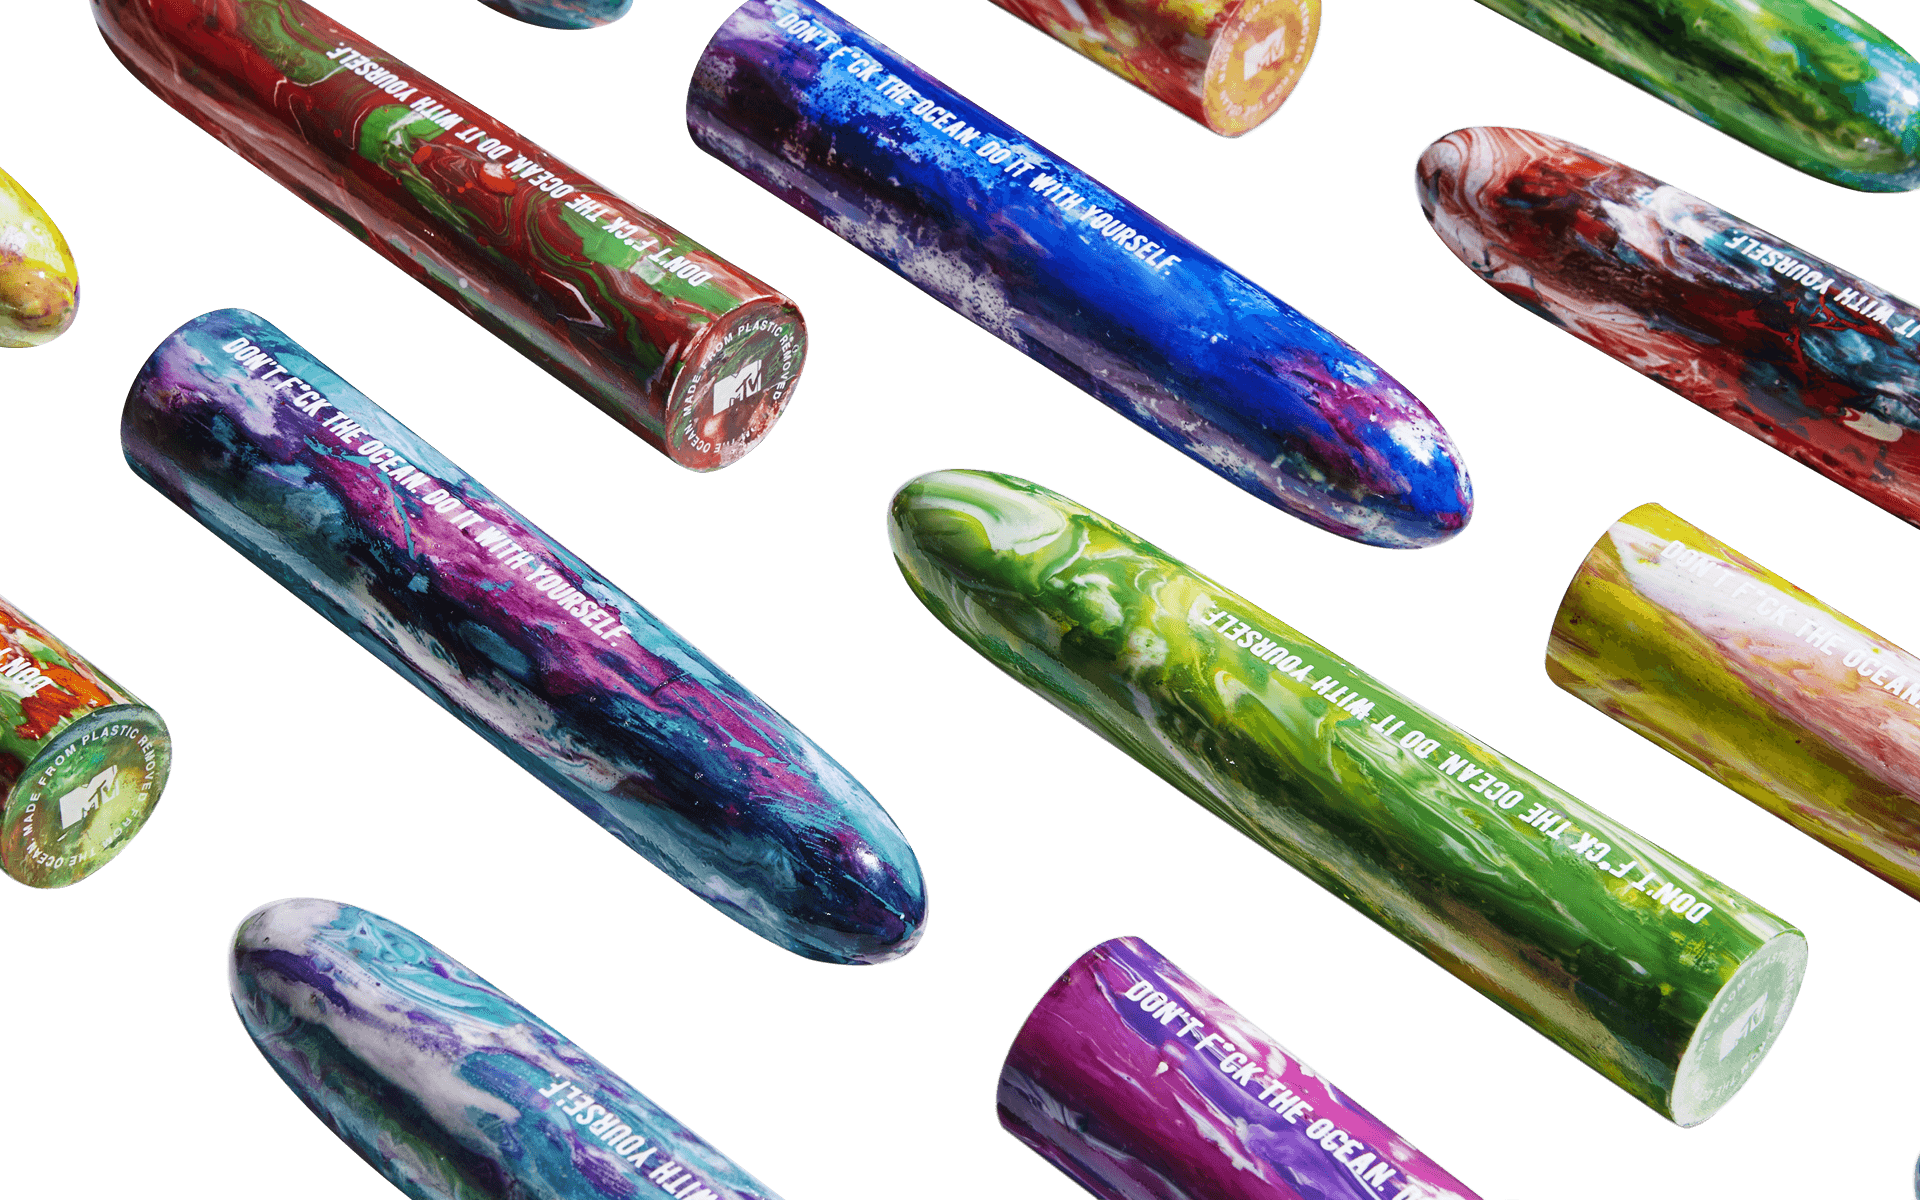 Ocean dildos made from recycled ocean plastic 1.